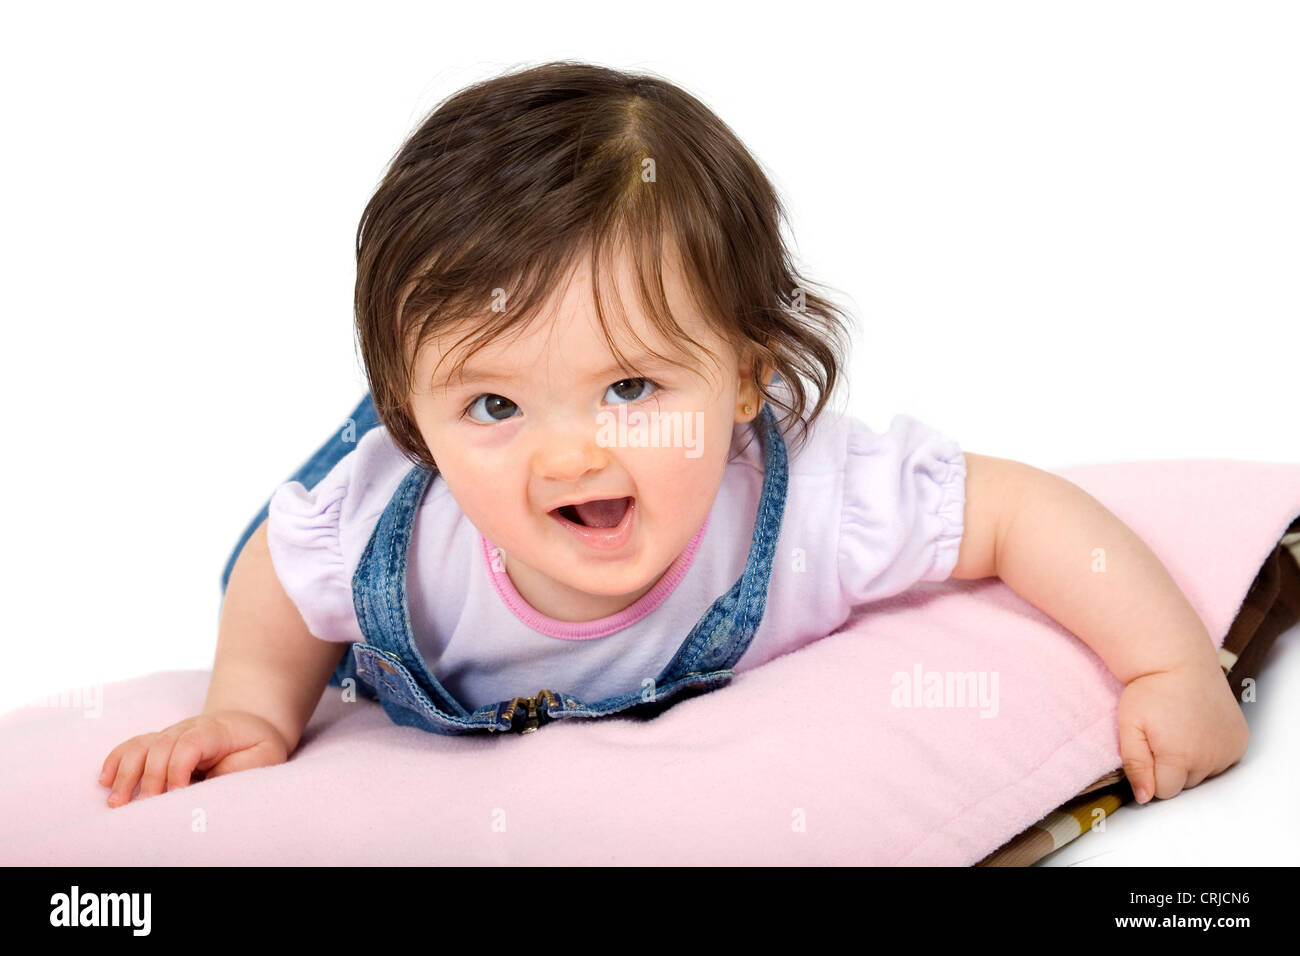 cute and cheeky baby Stock Photo